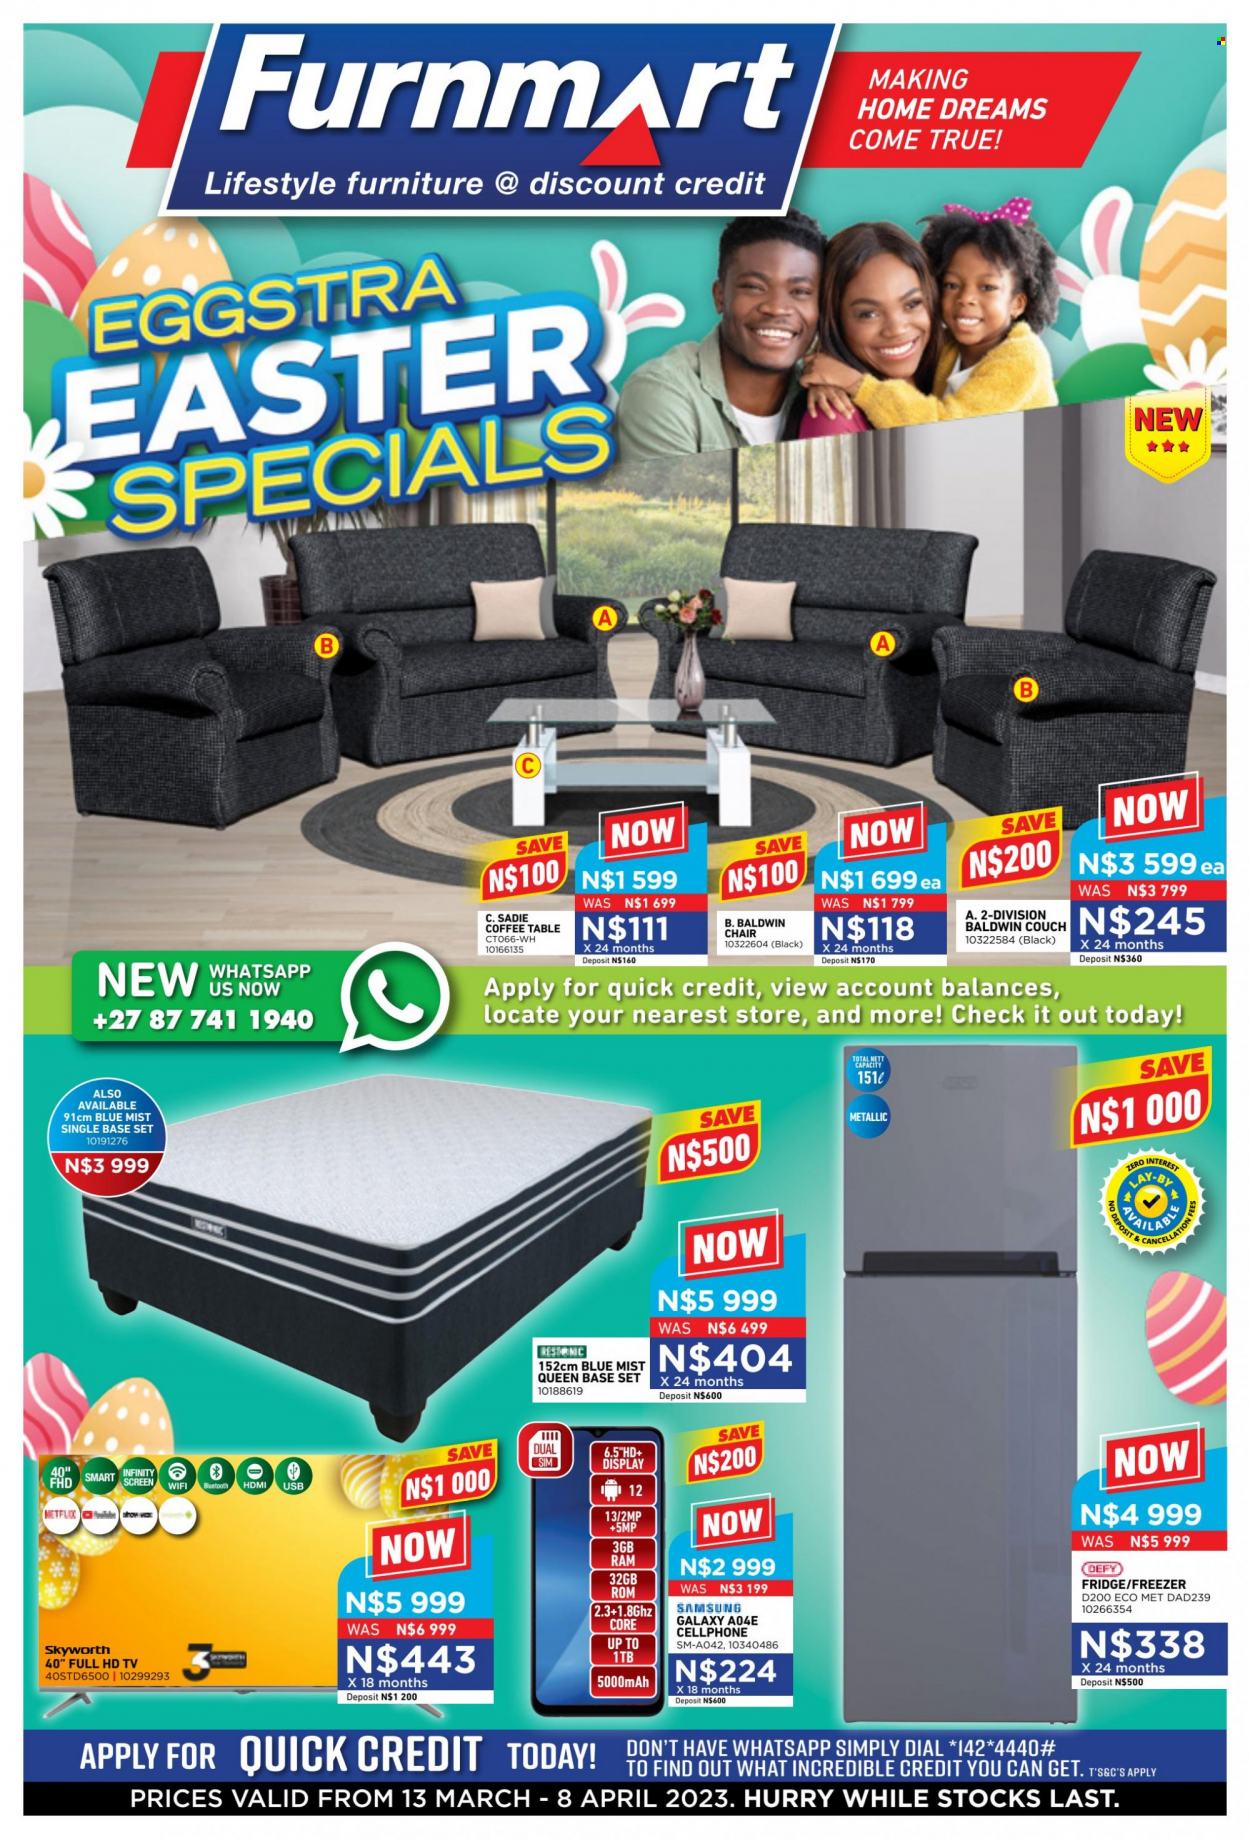 thumbnail - Furnmart catalogue  - 13/03/2023 - 08/04/2023 - Sales products - table, chair, couch, coffee table, base set, Samsung, Samsung Galaxy, HDTV, Full HD TV, TV, Skyworth, freezer, refrigerator, fridge. Page 1.